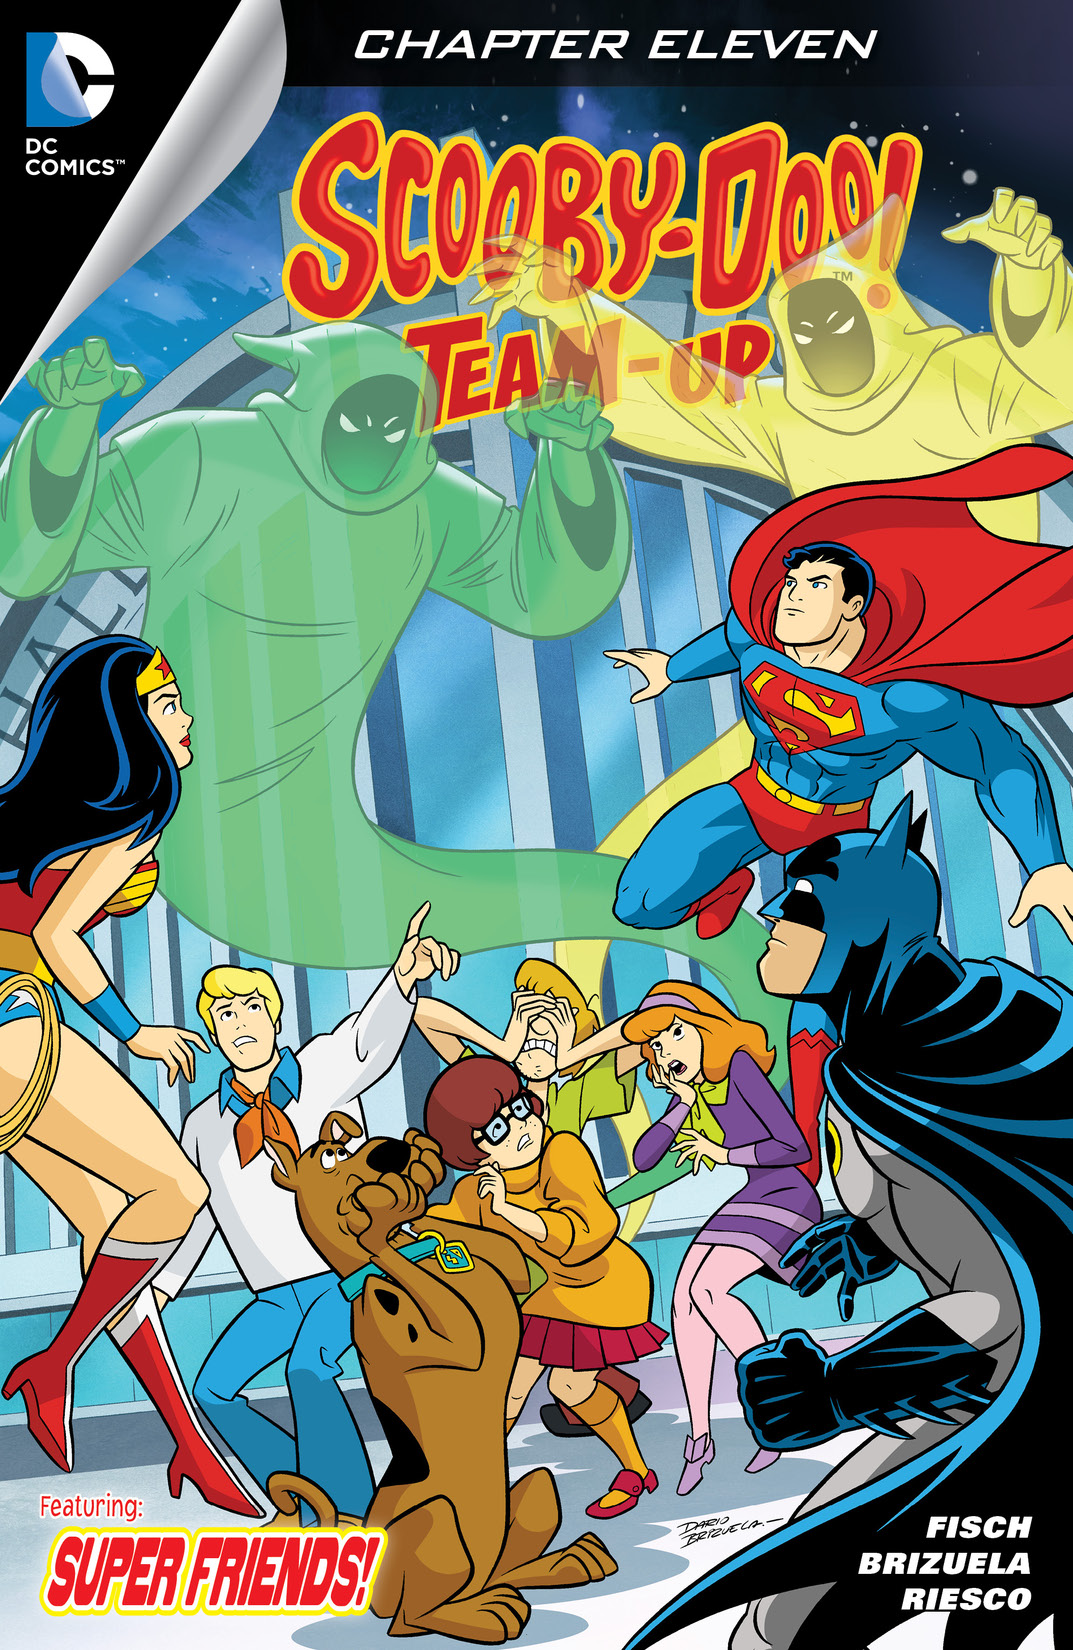 Scooby-Doo Team-Up #11 preview images